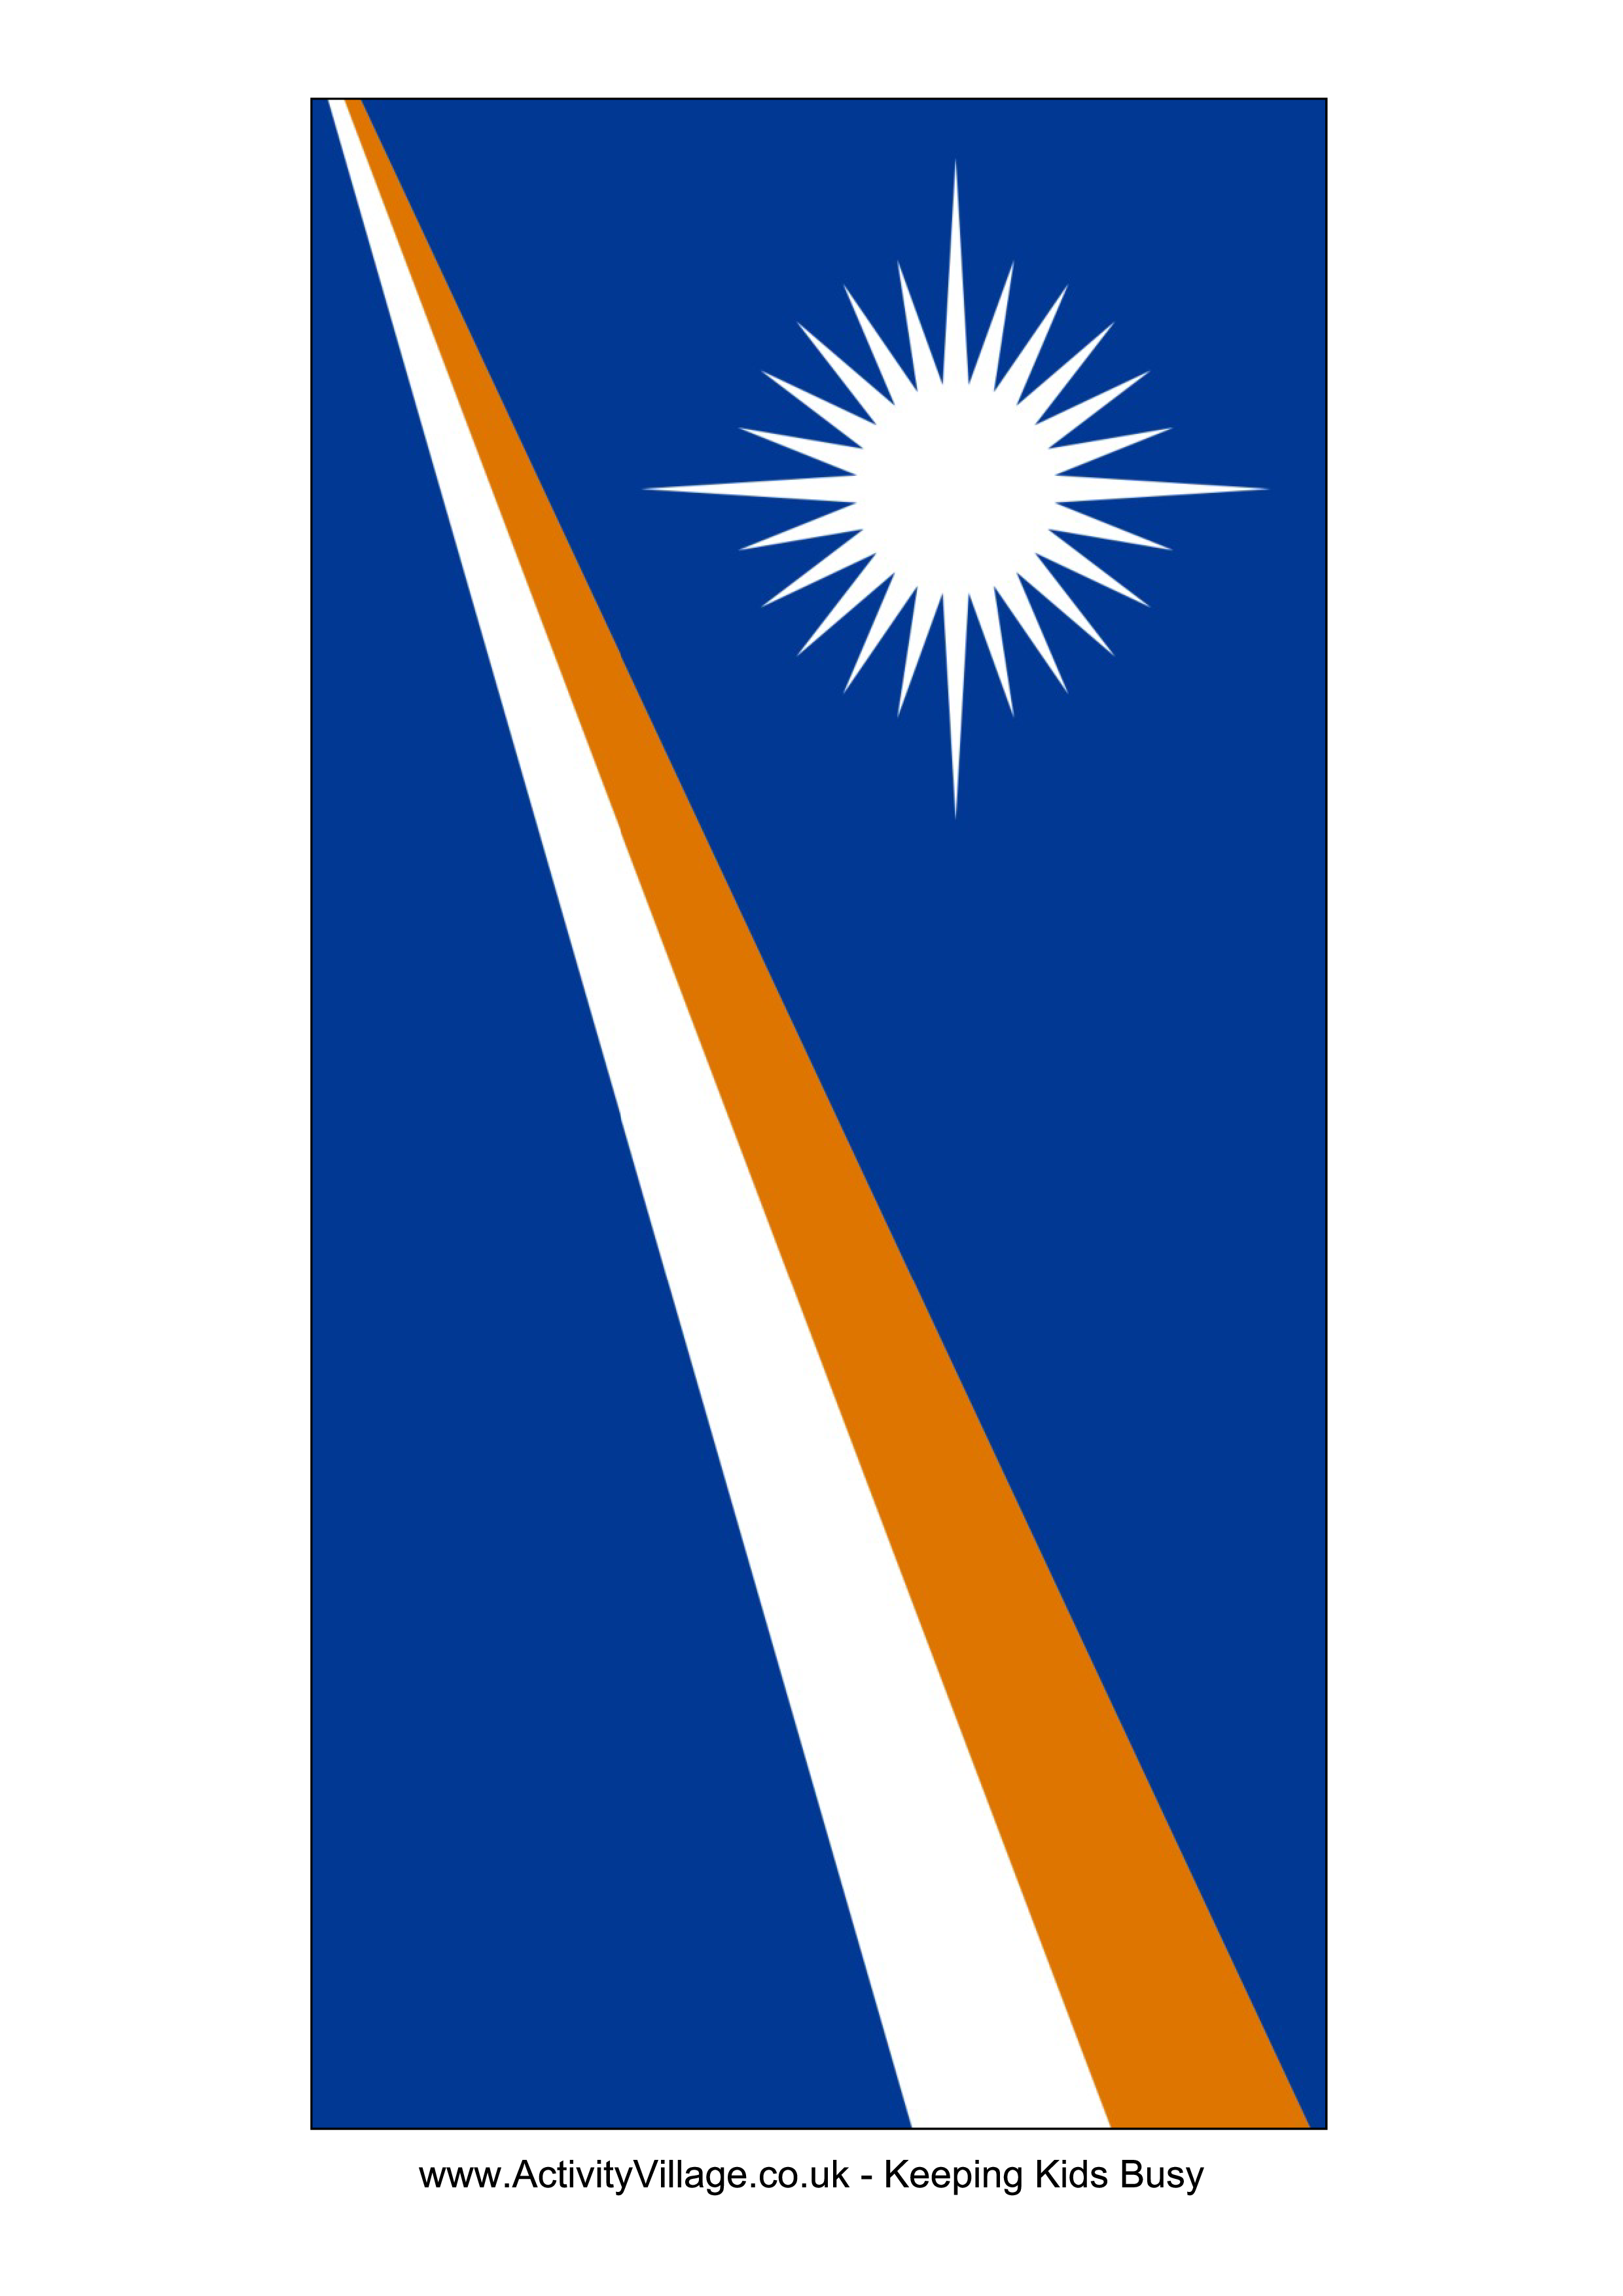 A Blue And Orange Rectangular Object With A White Star And A White Star